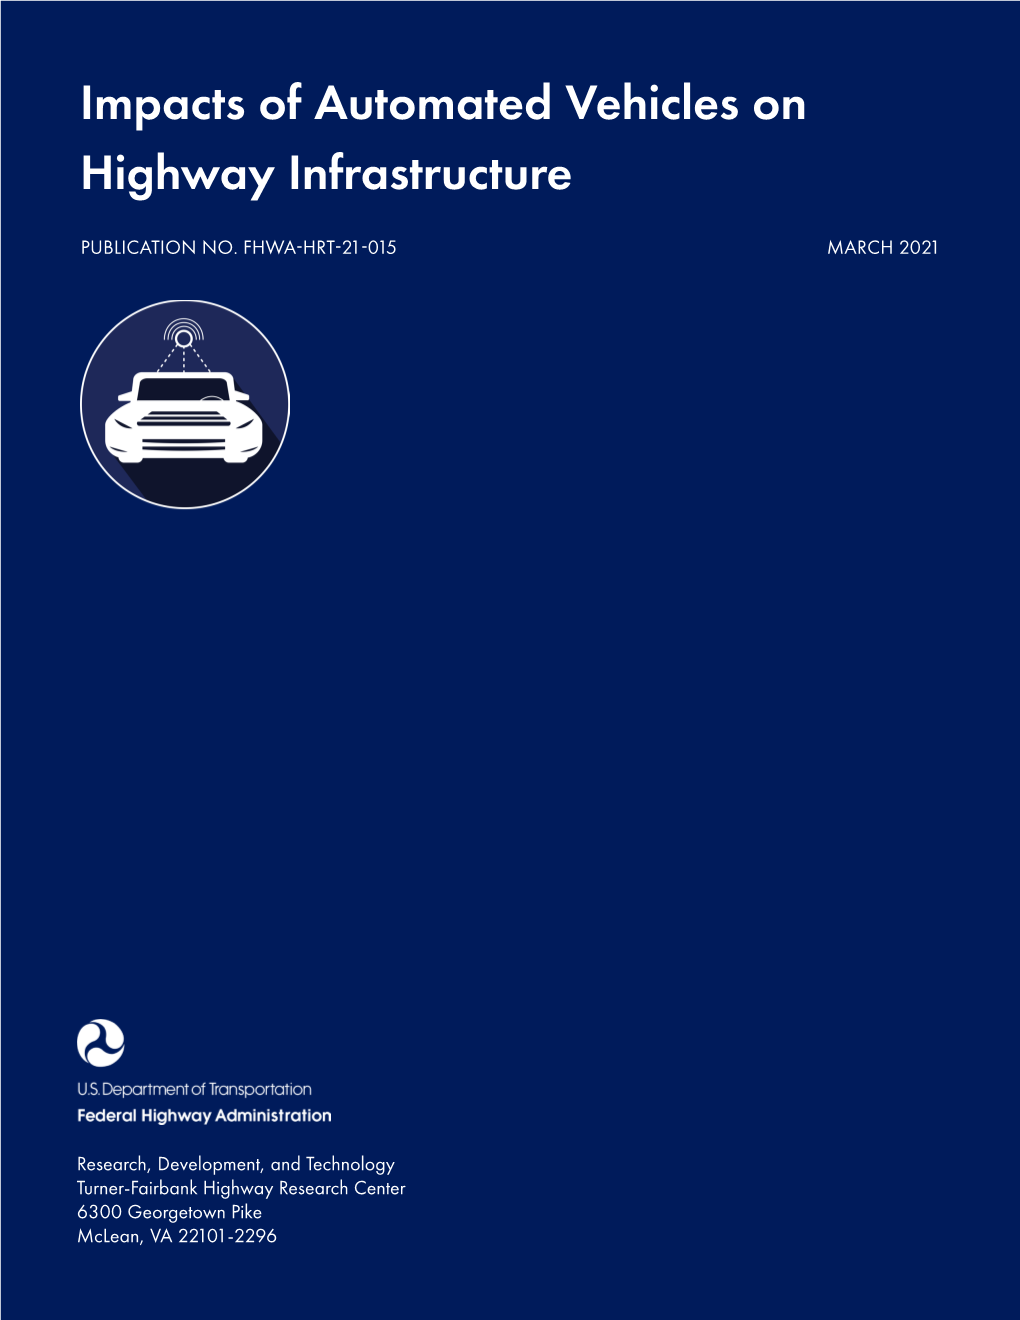 Impacts of Automated Vehicles on Highway Infrastructure